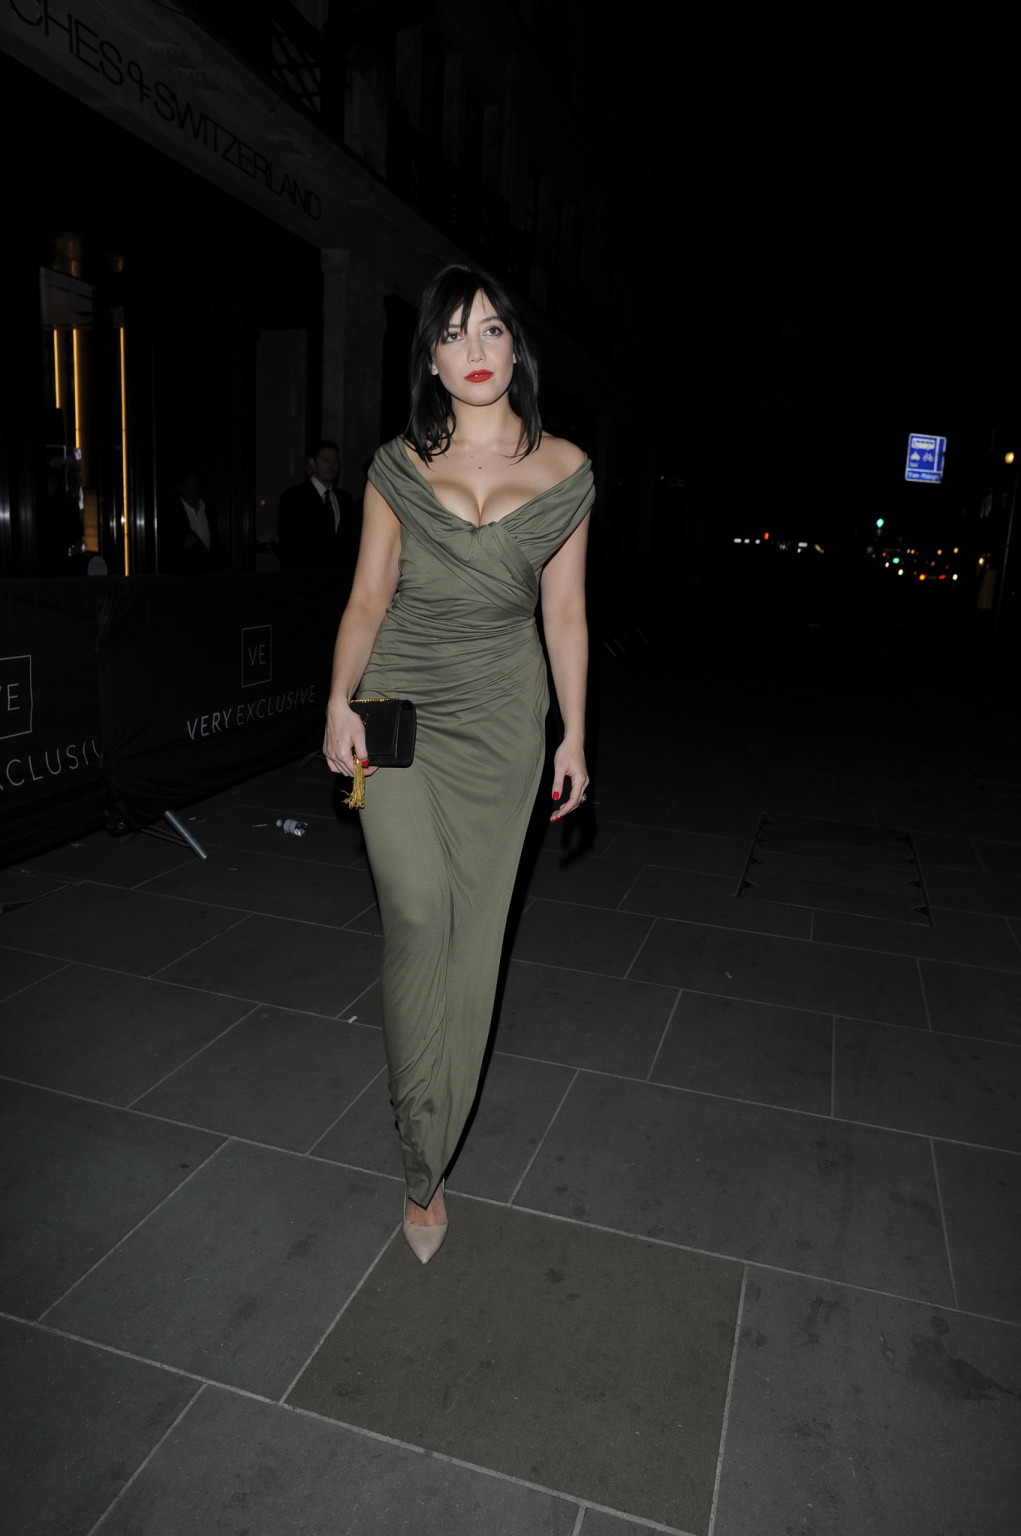 Busty Daisy Lowe areola peek wearing a low cut olive dress at the VeryExclusivec #75171864